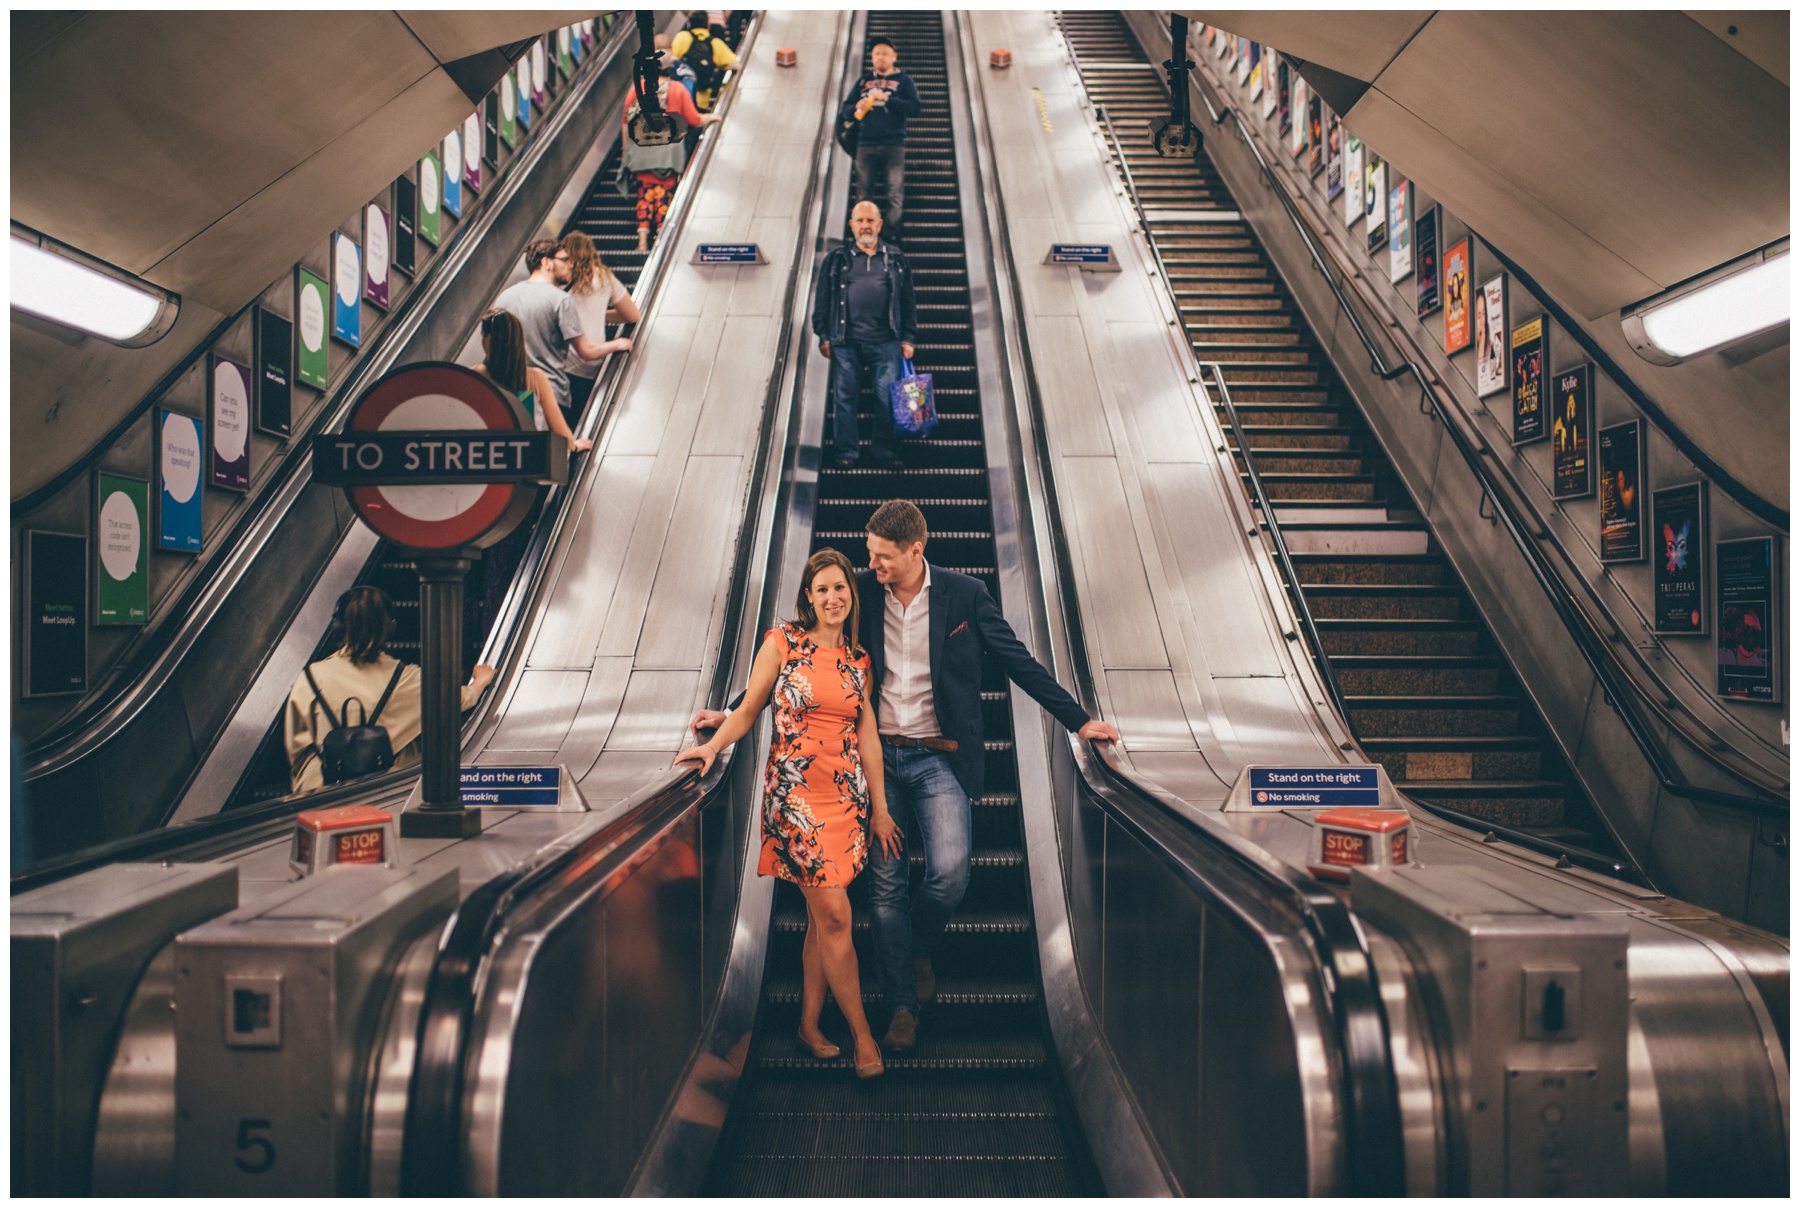 Bride and groom to-be have a photo shoot ahead of their wedding in London Underground.